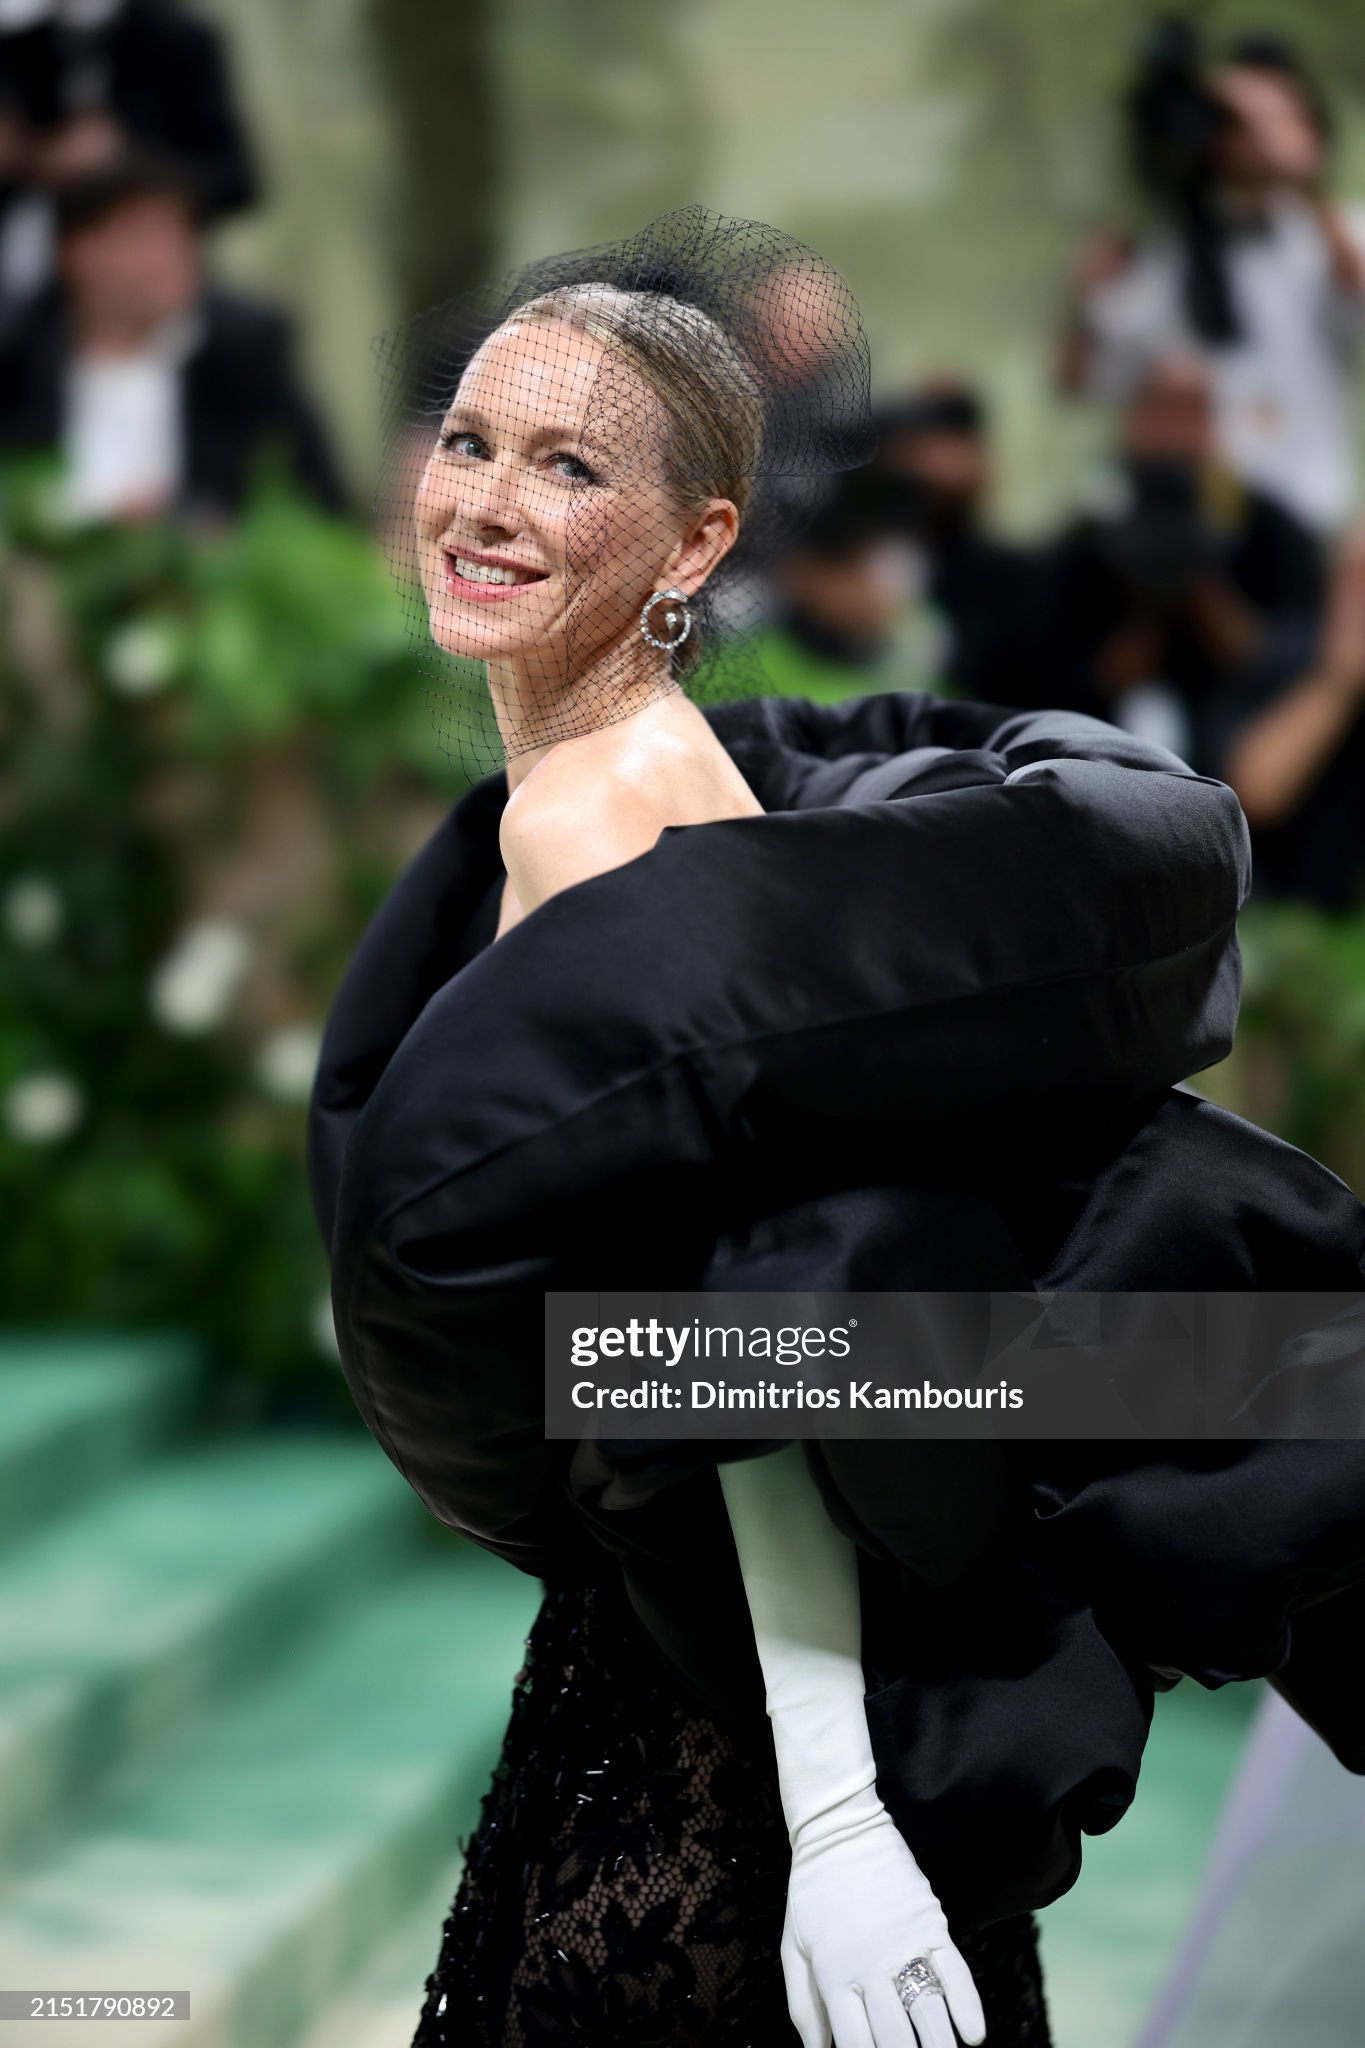 gettyimages-2151790892-2048x2048.jpg